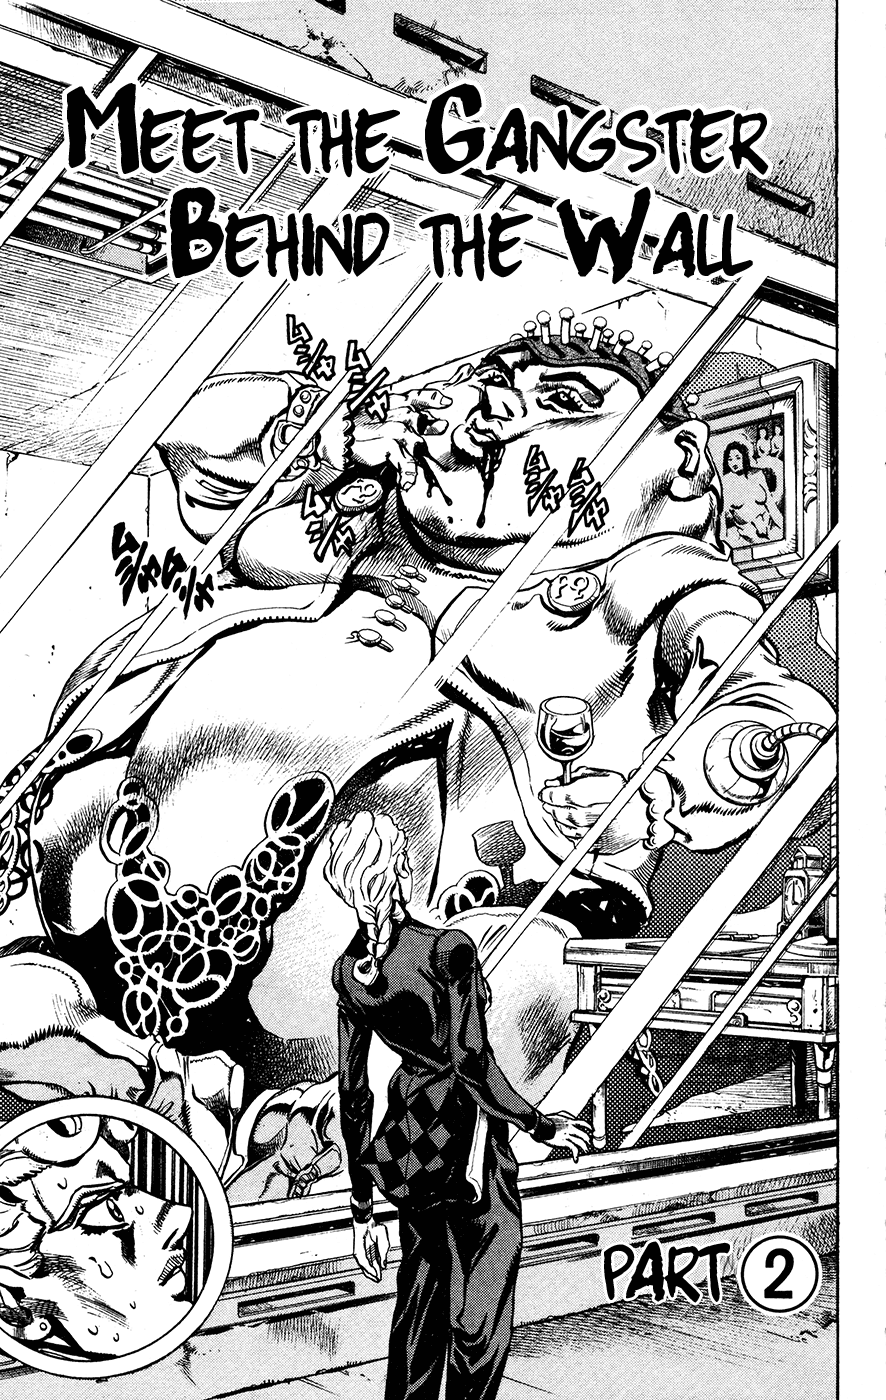 Jojo's Bizarre Adventure Part 5 - Vento Aureo Vol.2 Chapter 10: Meet The Gangster Behind The Wall Part 2 - Picture 1